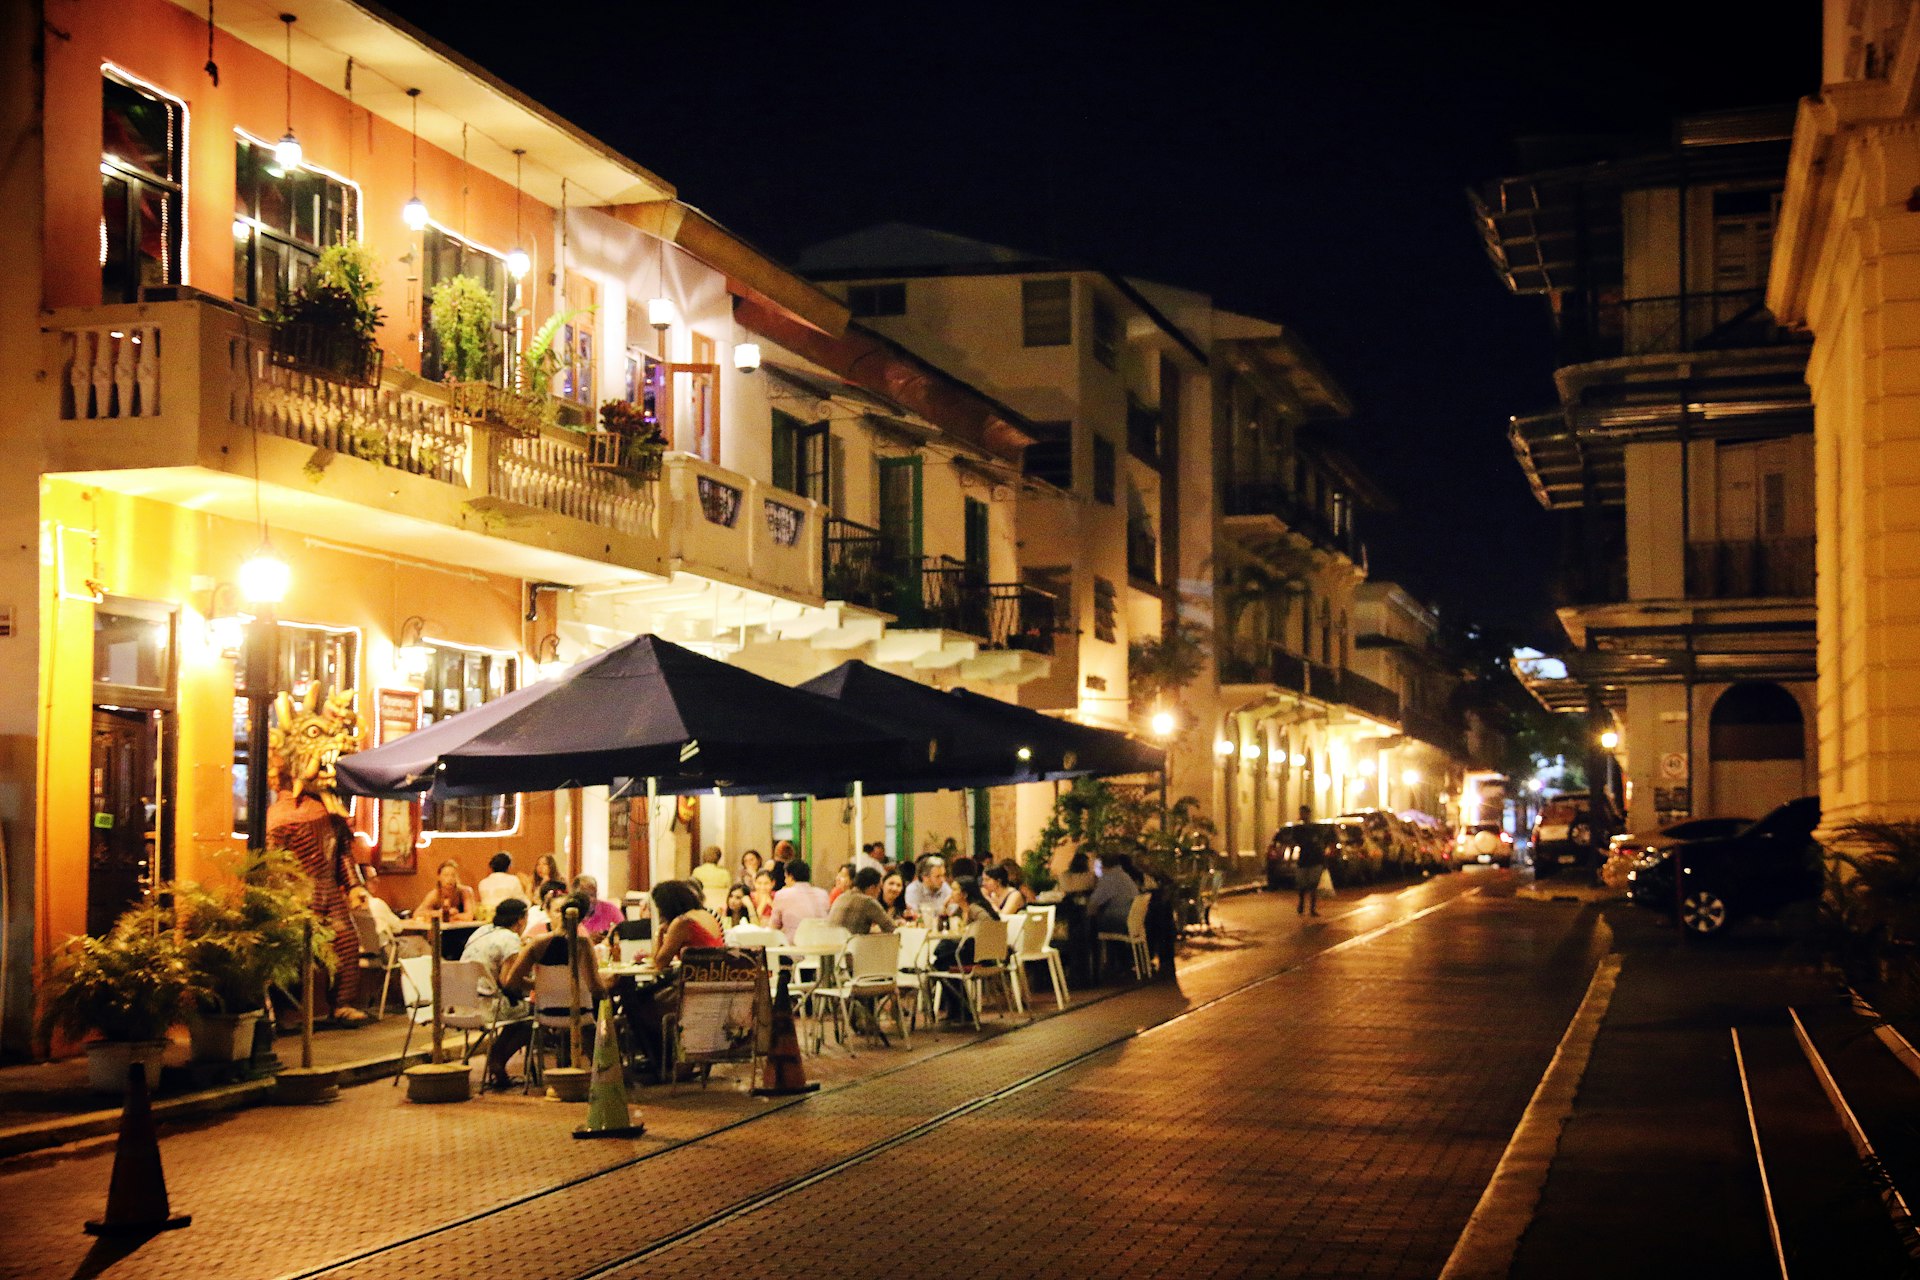 Visitors and locals alike enjoy dining in the quaint and historic surroundings along the streets of Panama's old quarter.